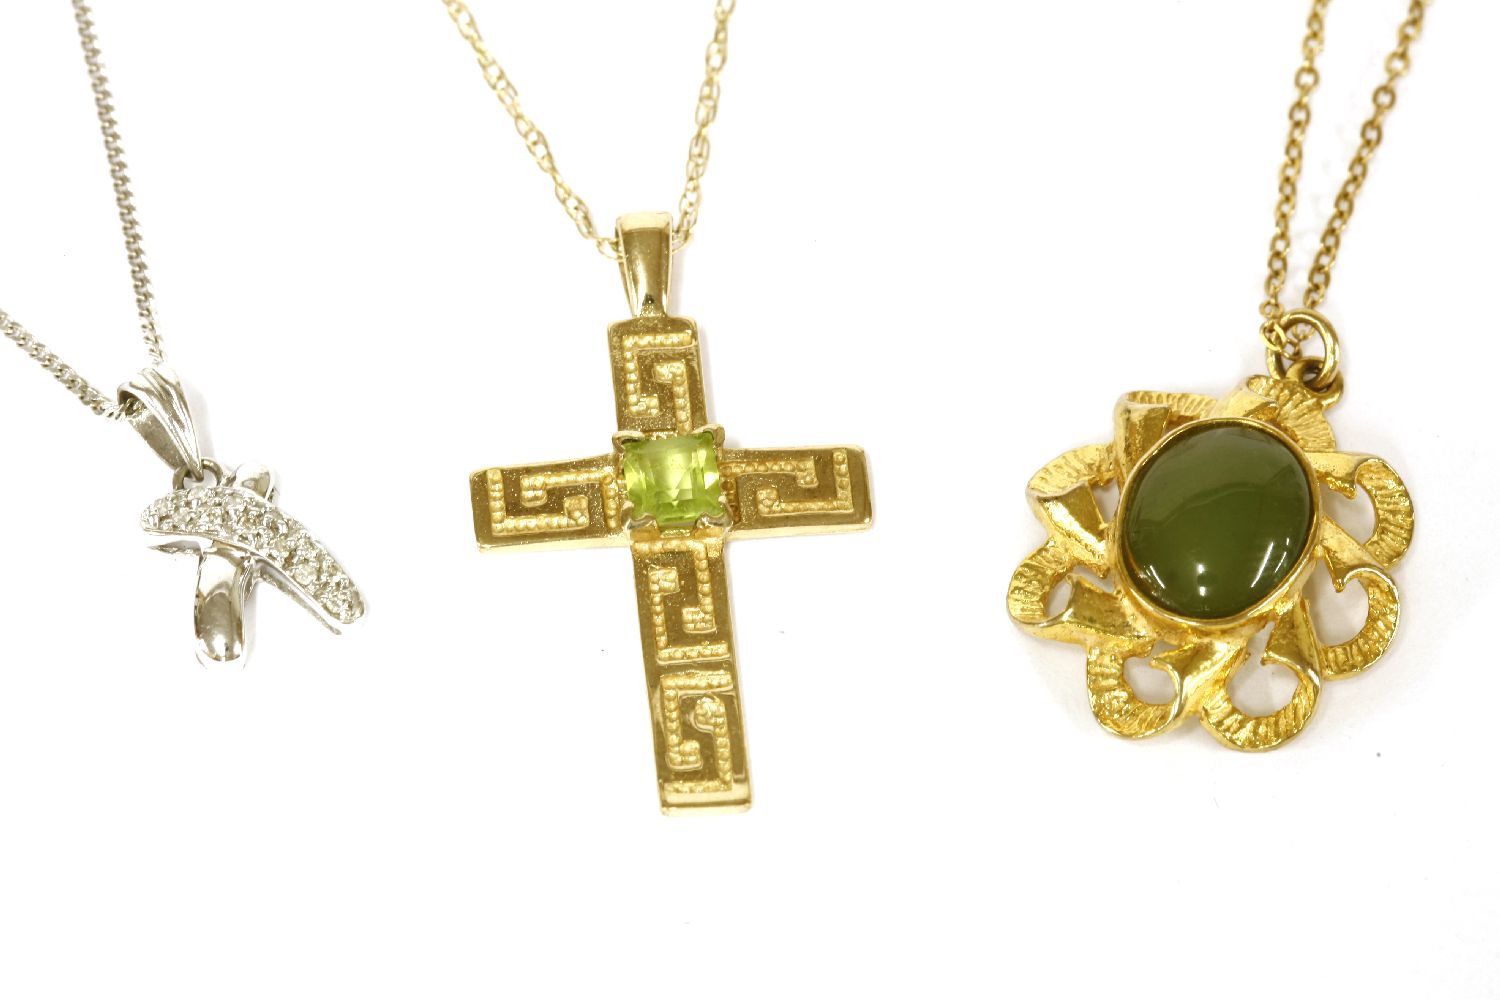 A white gold diamond set cross over pendant on chain, a 9ct gold cross with Greek key decoration and